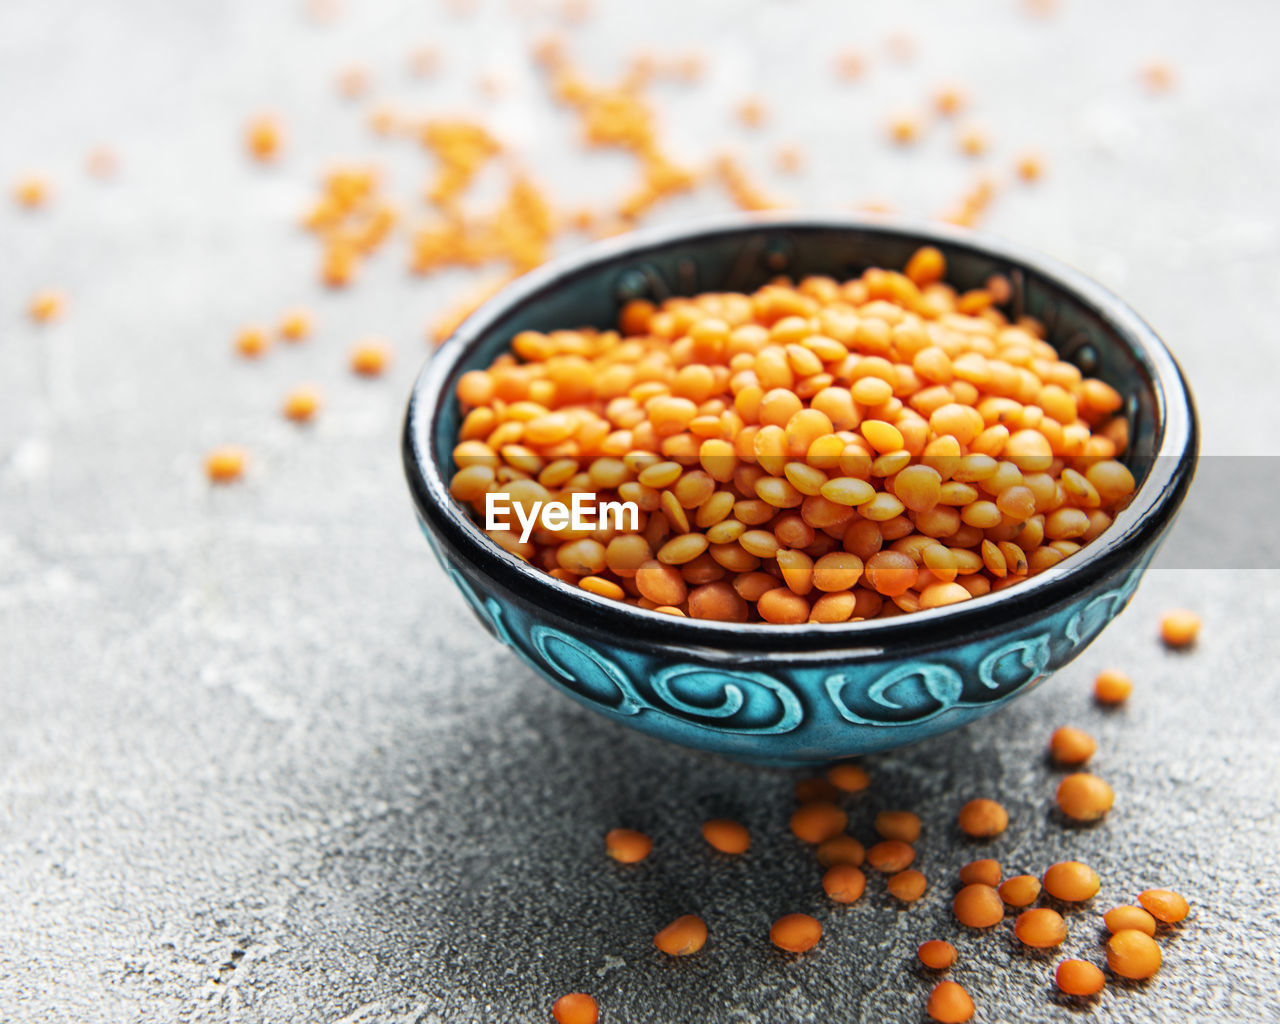 Organic healthy red lentils in bowl on a table